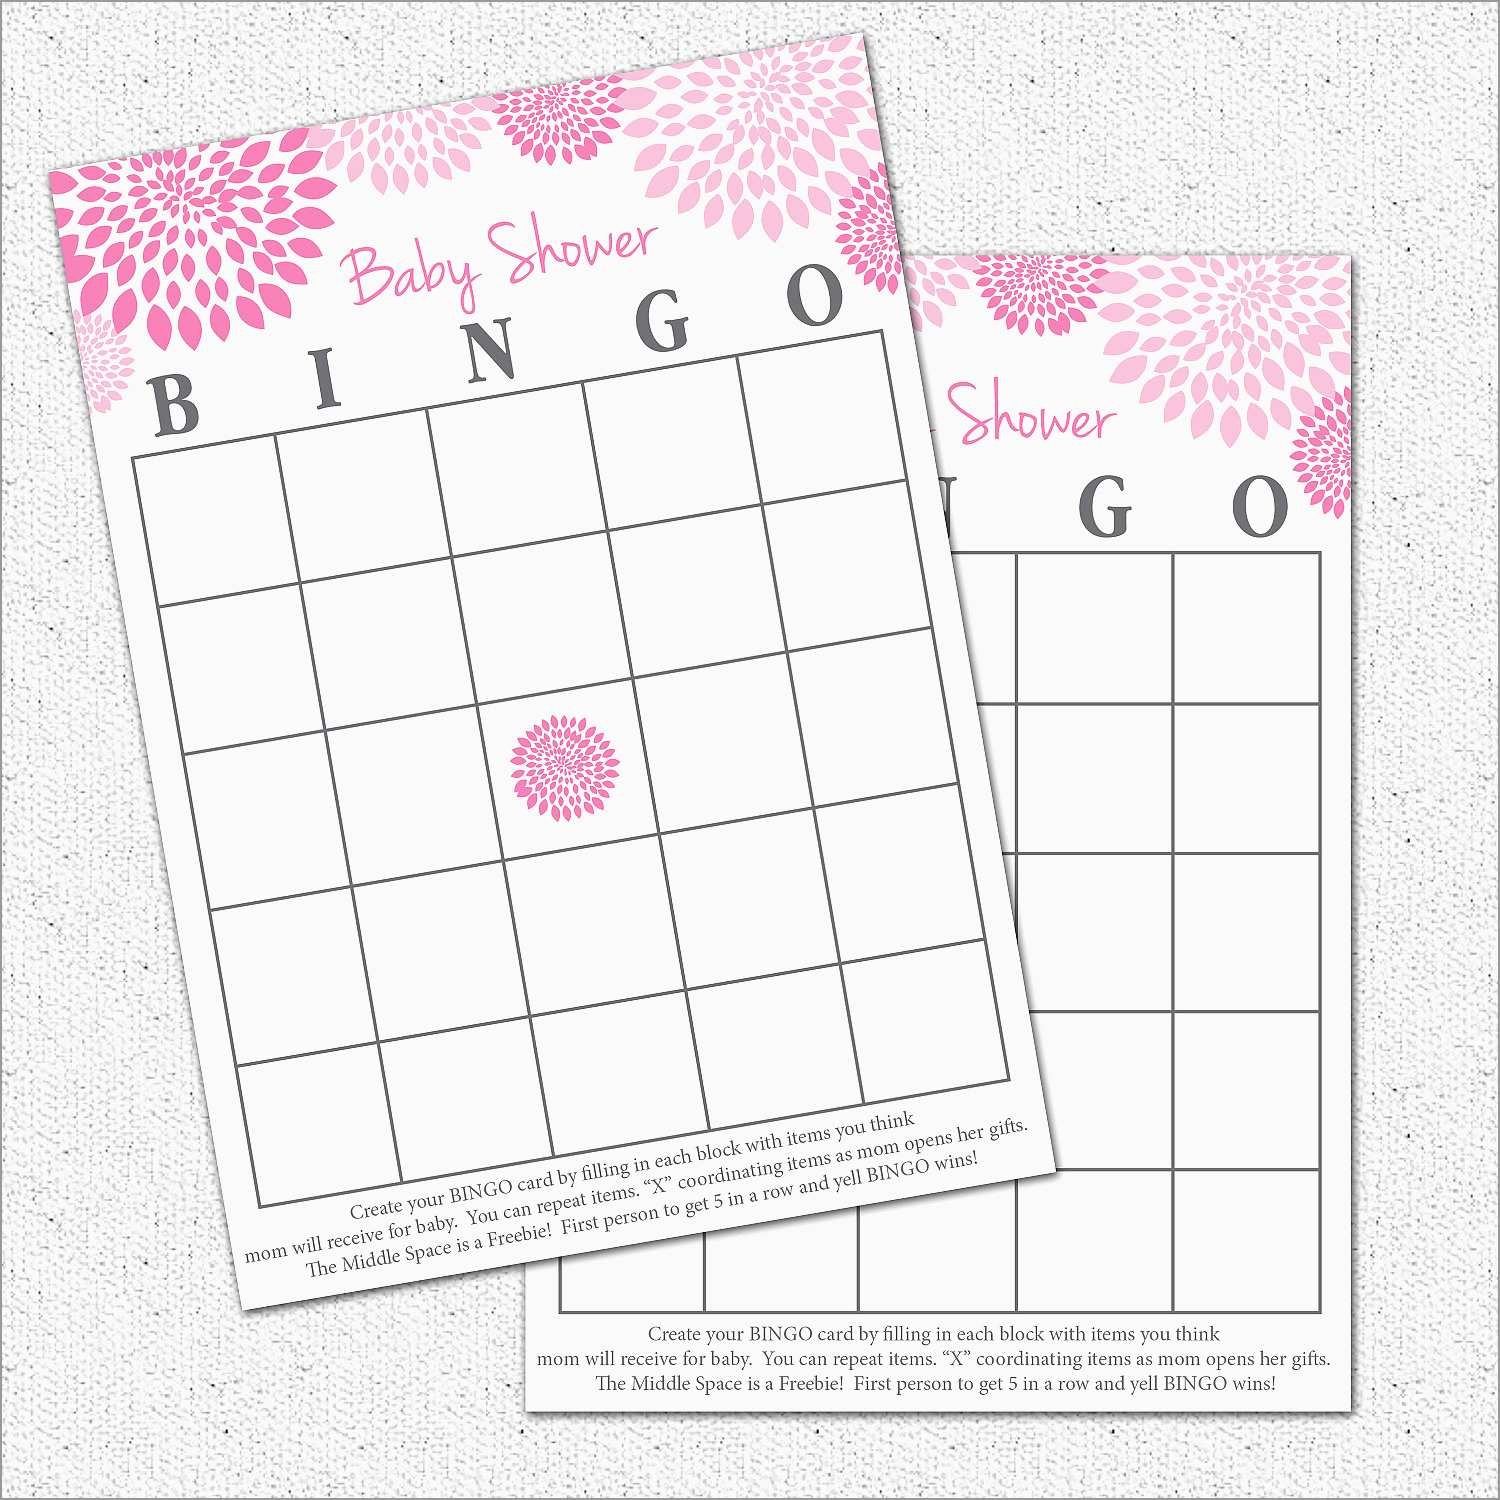 Awesome Free Baby Shower Bingo Blank Template | Best Of Template - Free Printable Blank Bingo Cards